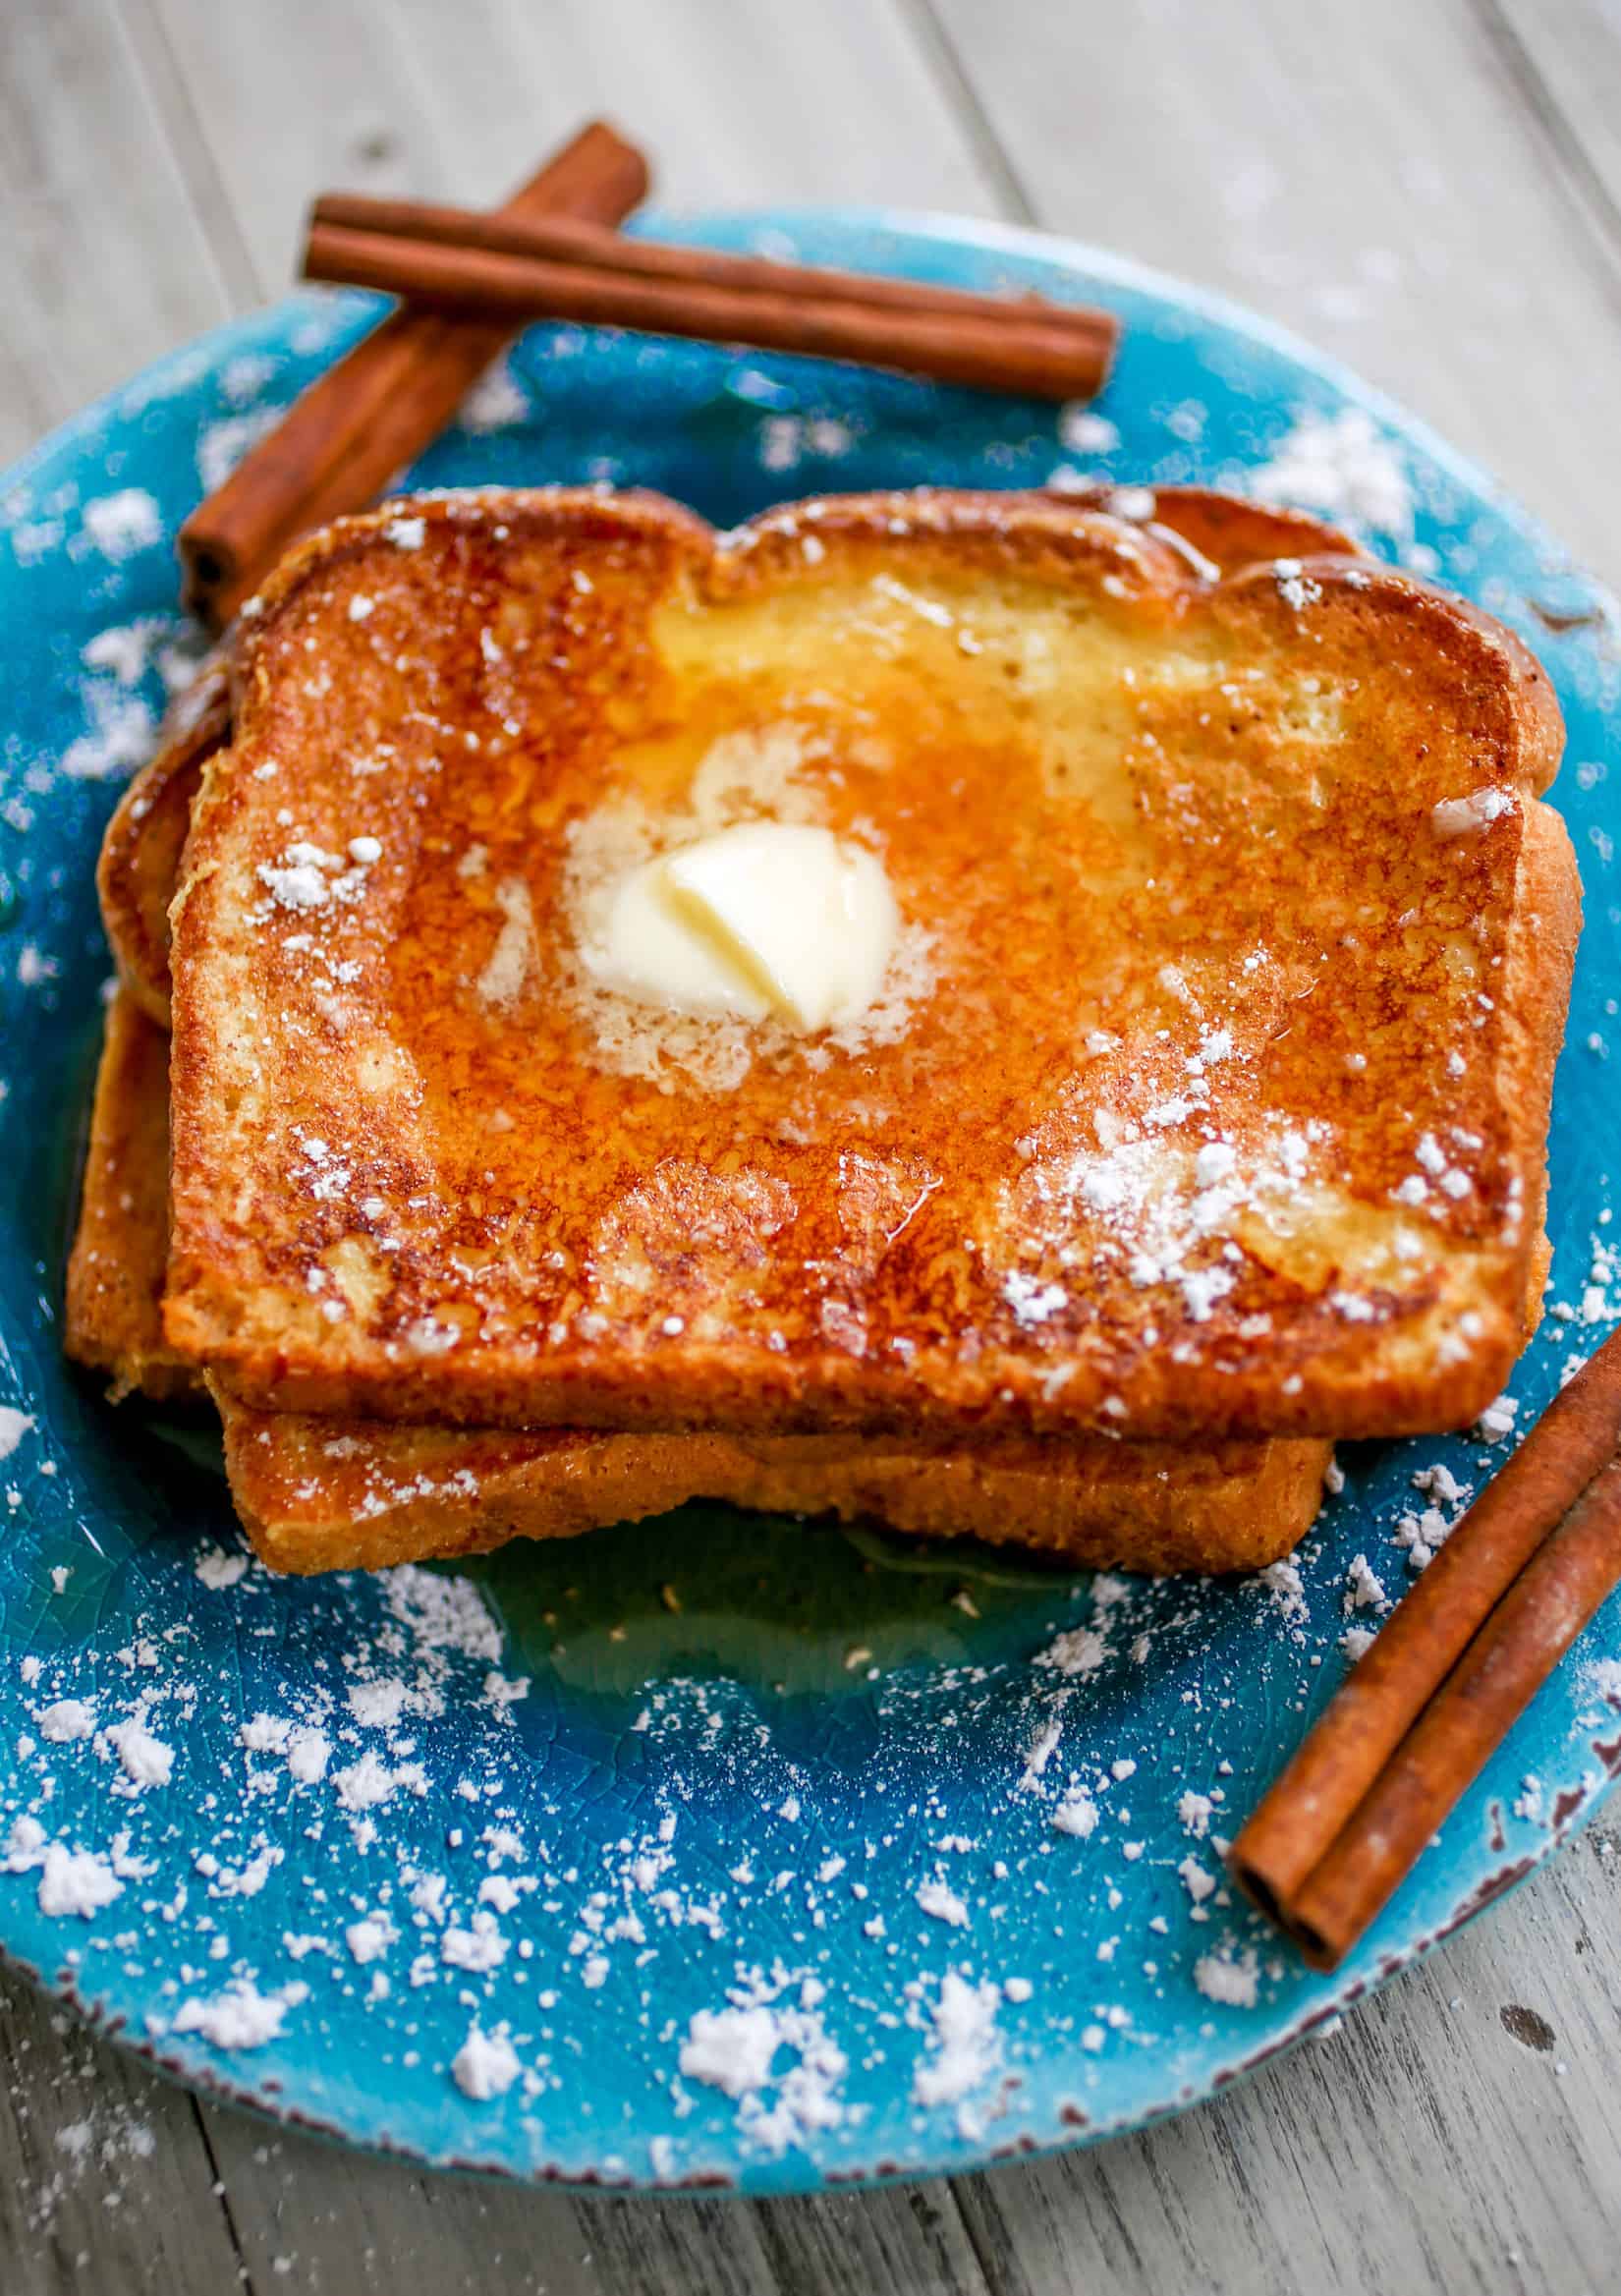 Eggnog French Toast - Sweet, lightly spiced breakfast perfection is what I like to call this eggnog french toast! The perfect holiday season breakfast!